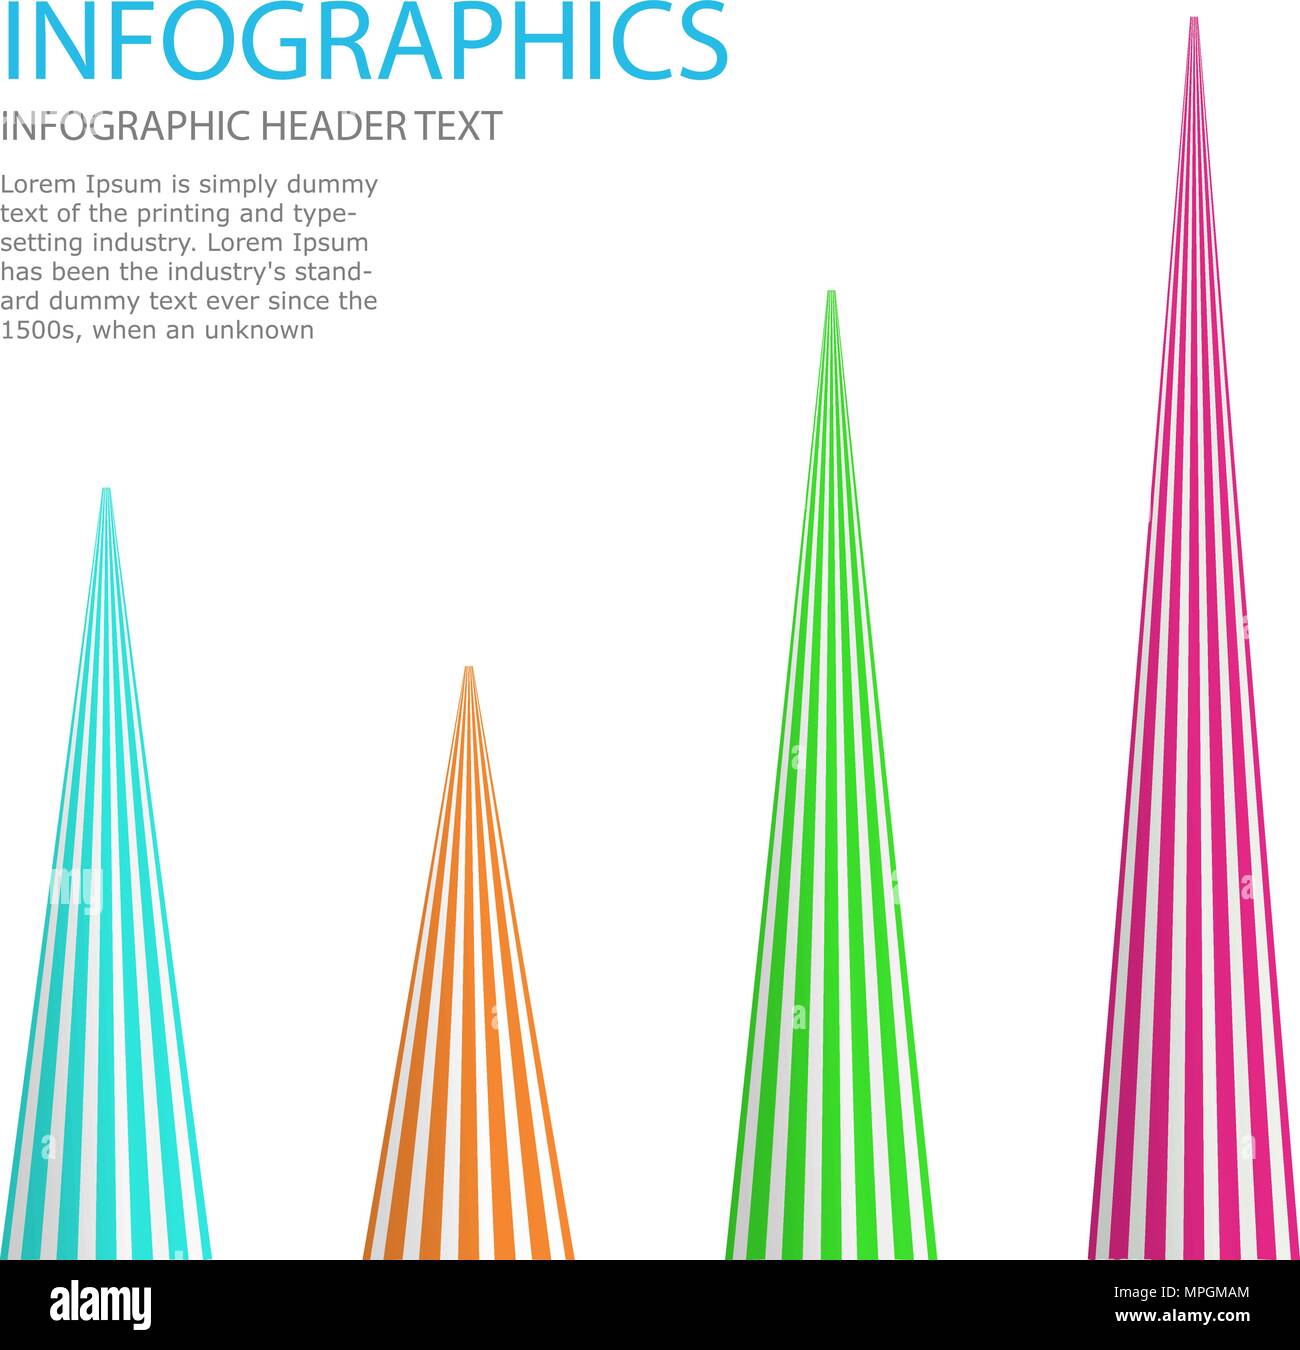 Abstract infographics template. Business data visualization.  Stock Vector